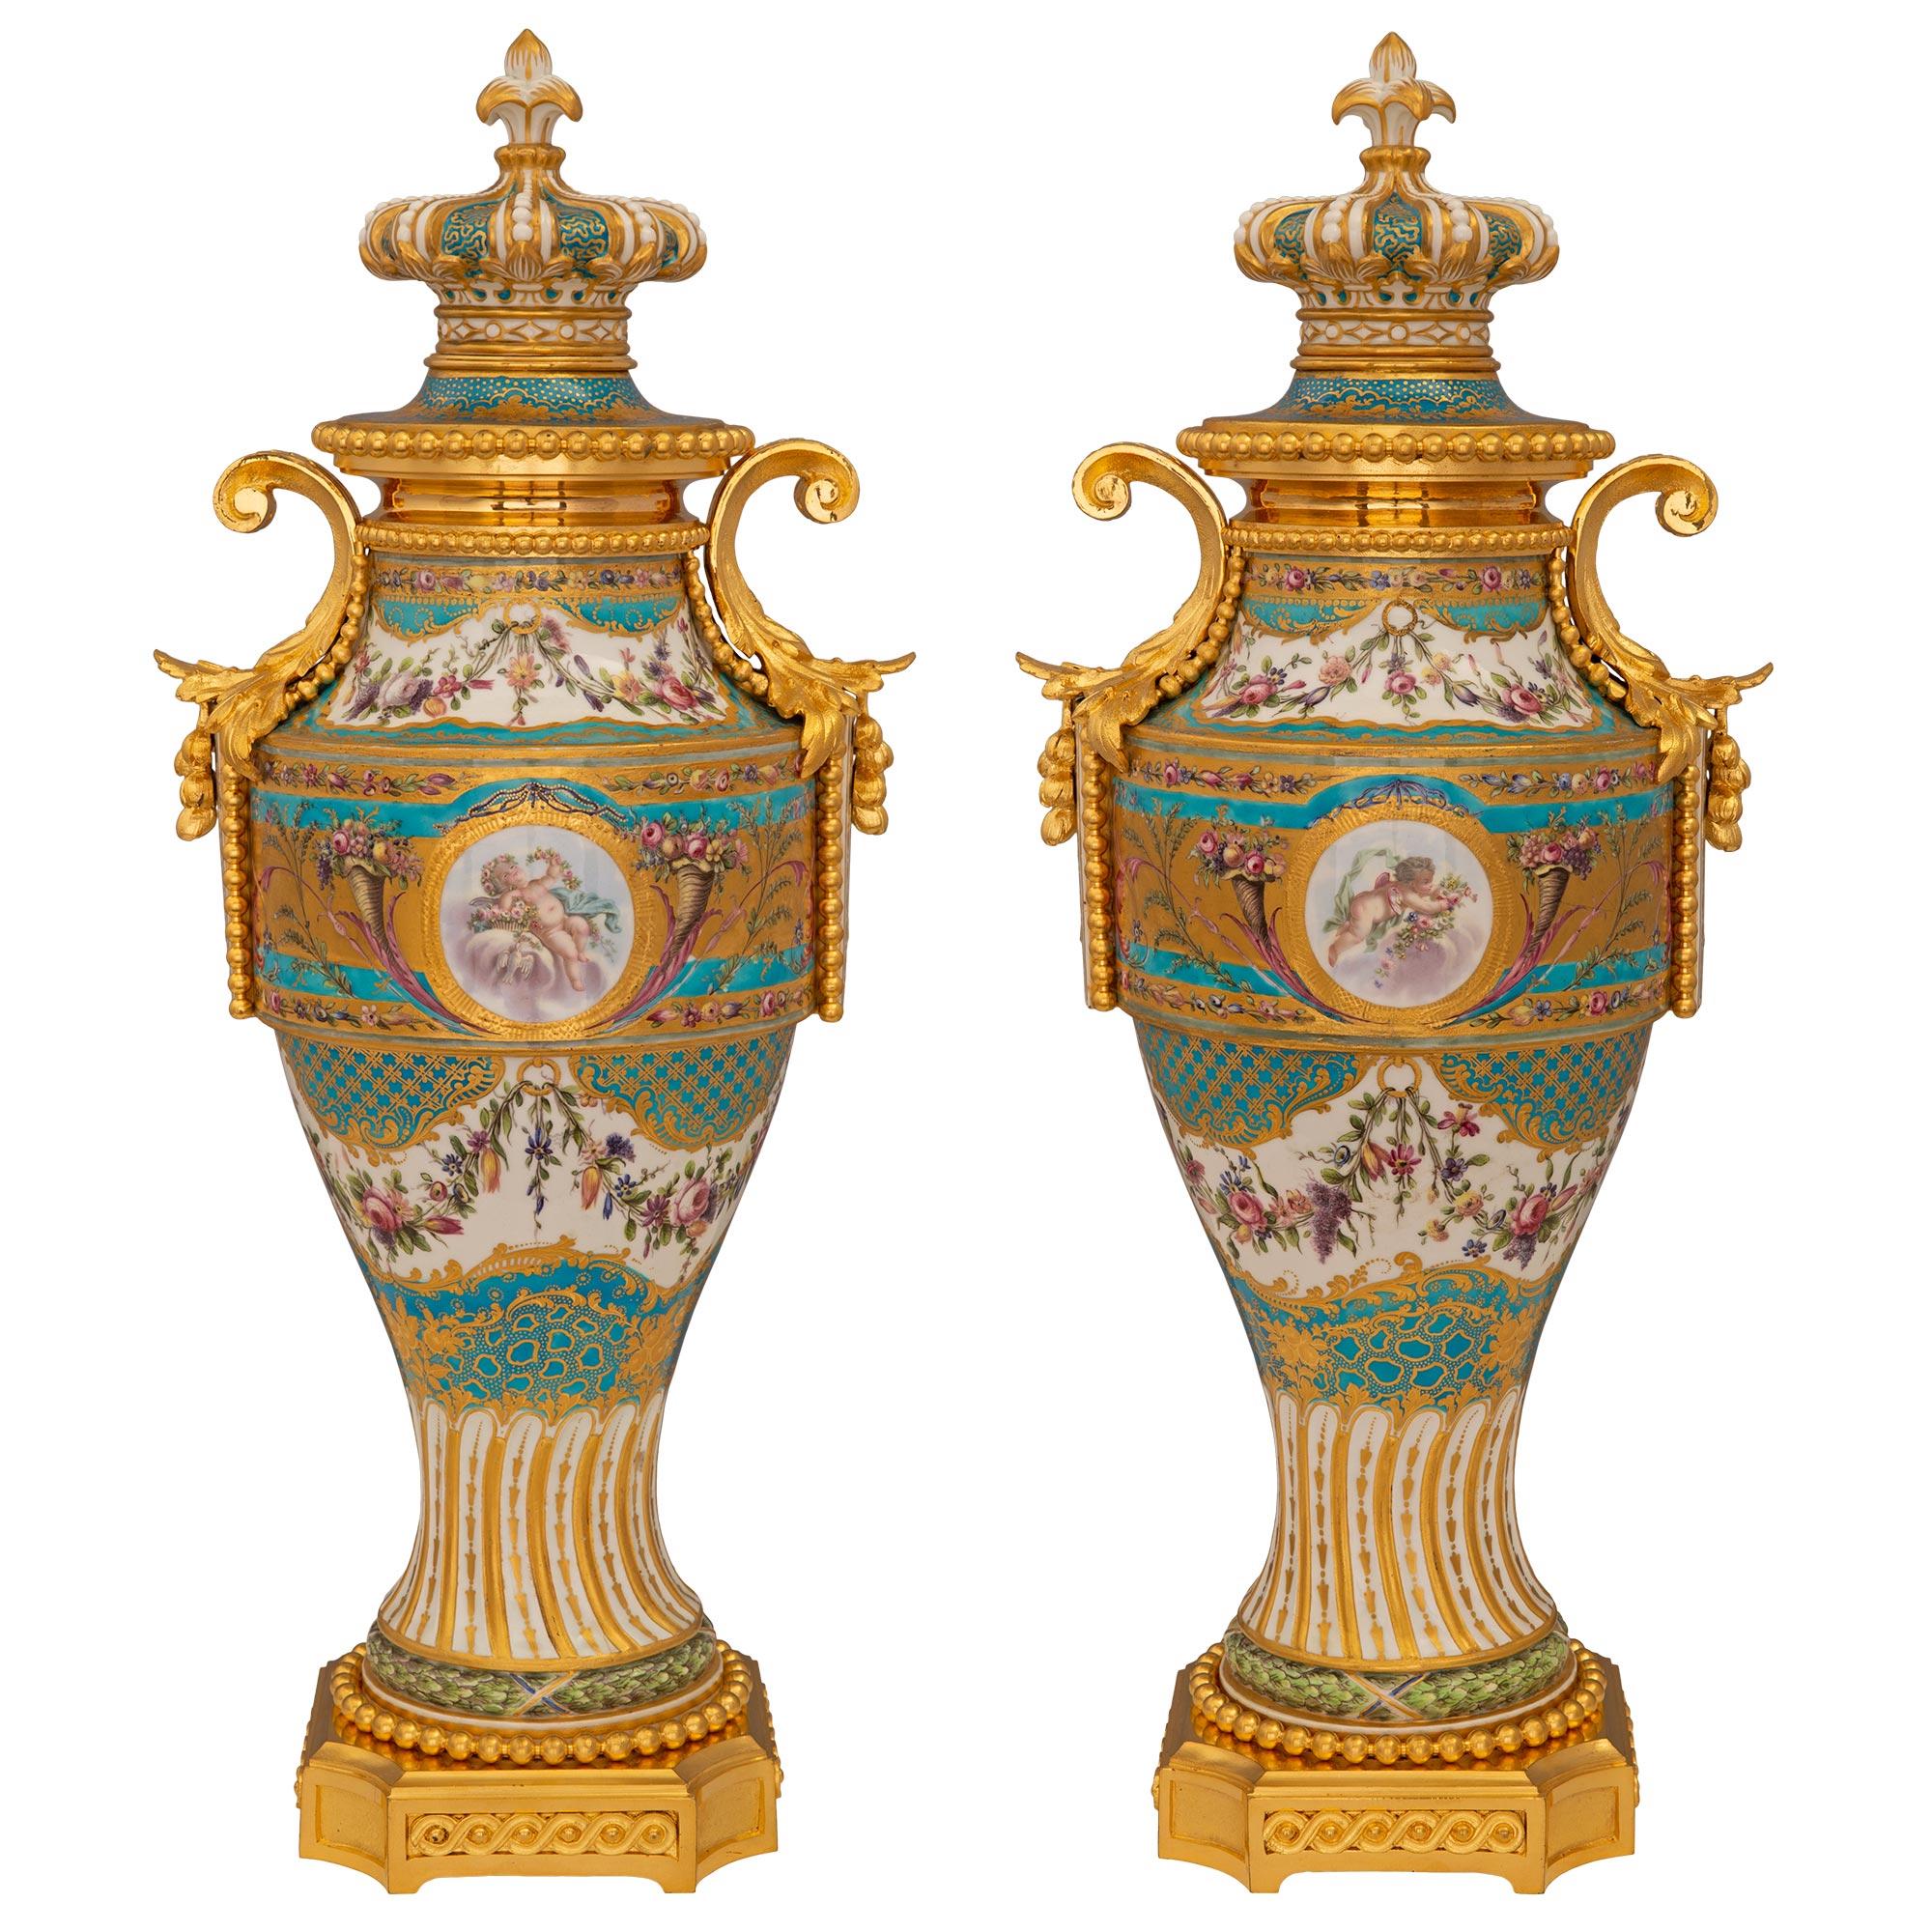 A stunning and extremely decorative true pair of French 19th century Louis XVI st. Sèvres porcelain and ormolu lidded urns. Each urn is raised by a square ormolu base with concave corners, decorated with fitted decorative interlocking designs and a